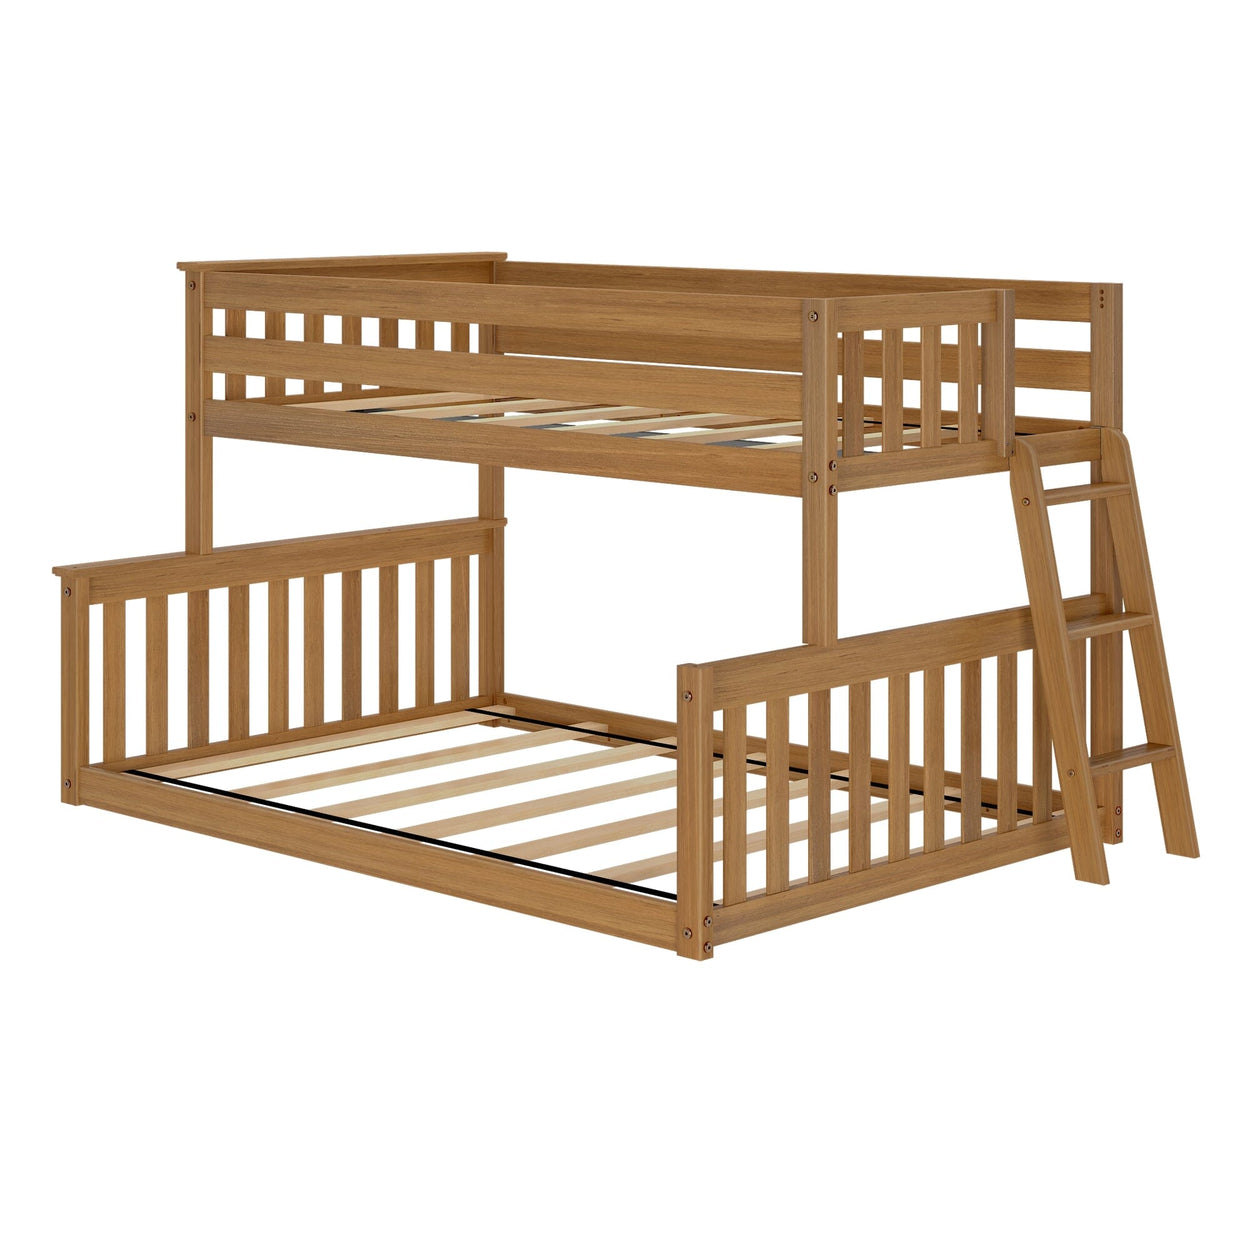 185323-007 : Bunk Beds Twin over Full Low Bunk with Angled Ladder on End, Pecan